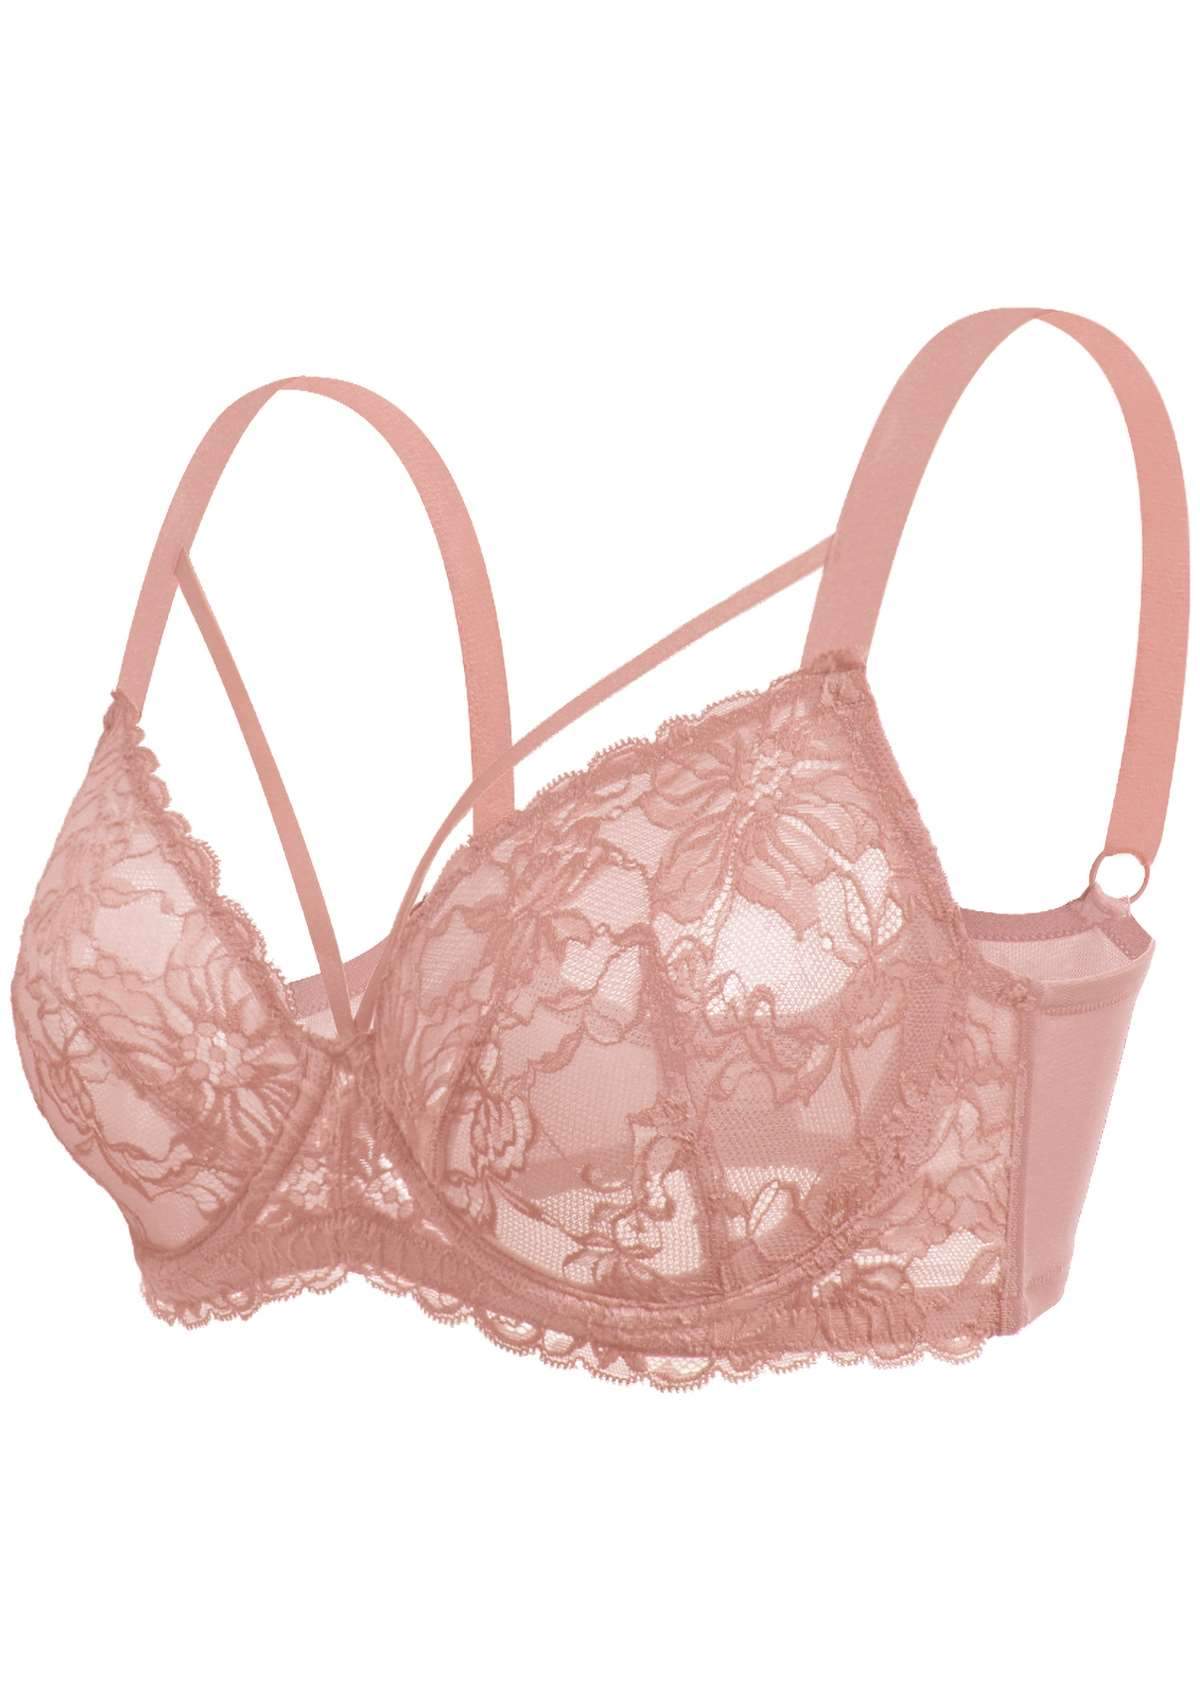 HSIA Pretty In Petals Lace Bra And Panty Sets: Bra For Big Boobs - Light Coral / 40 / C